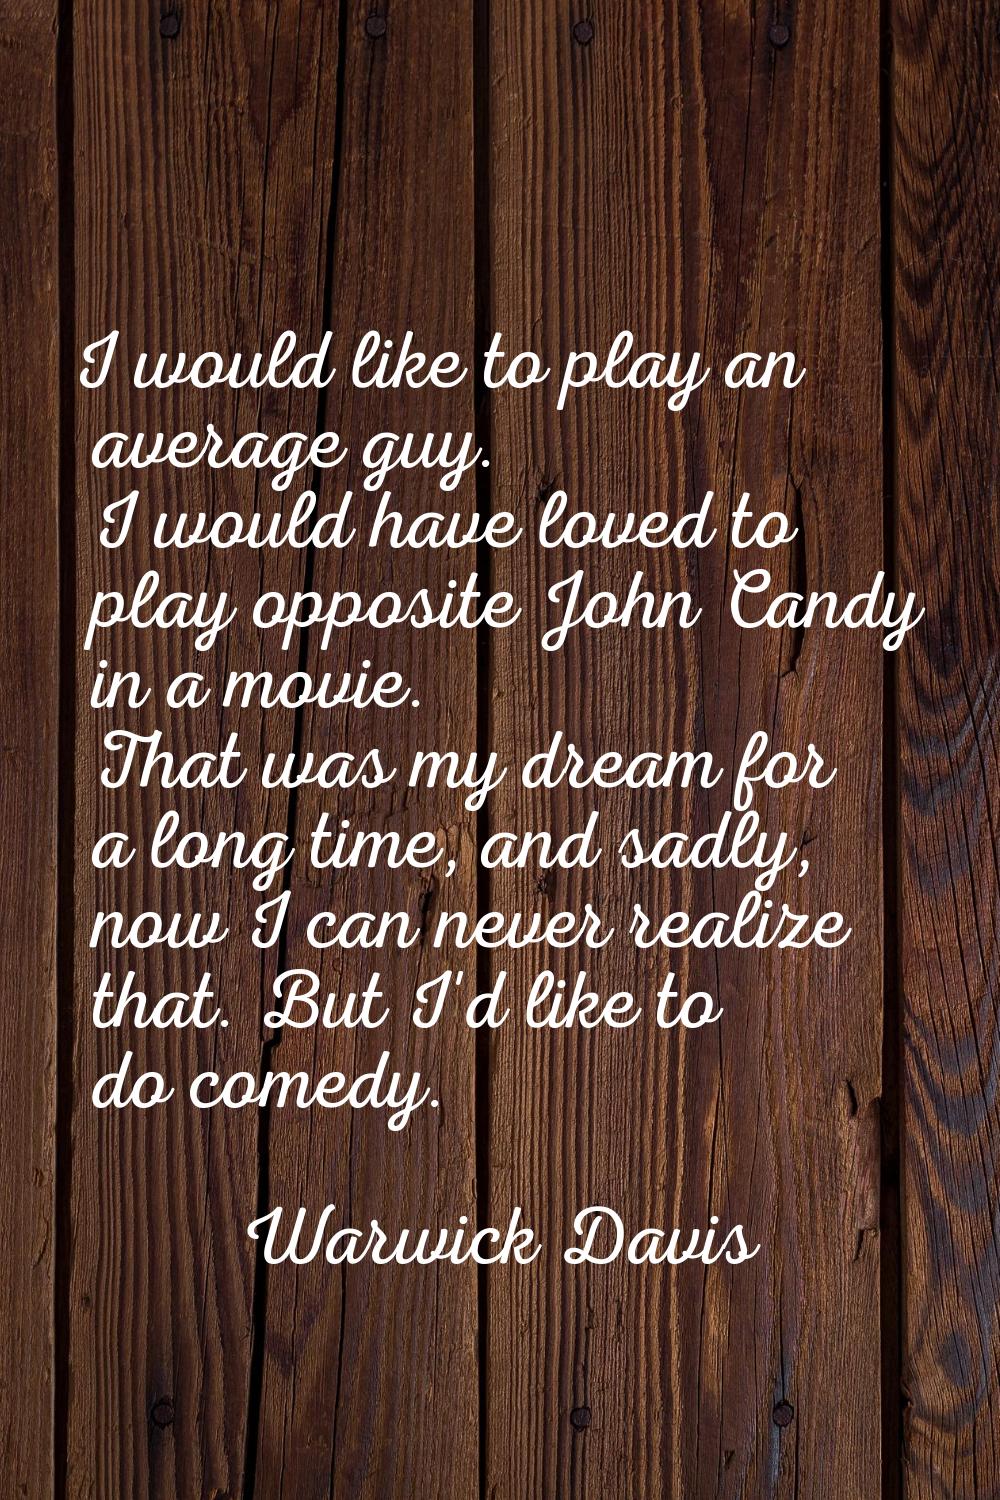 I would like to play an average guy. I would have loved to play opposite John Candy in a movie. Tha